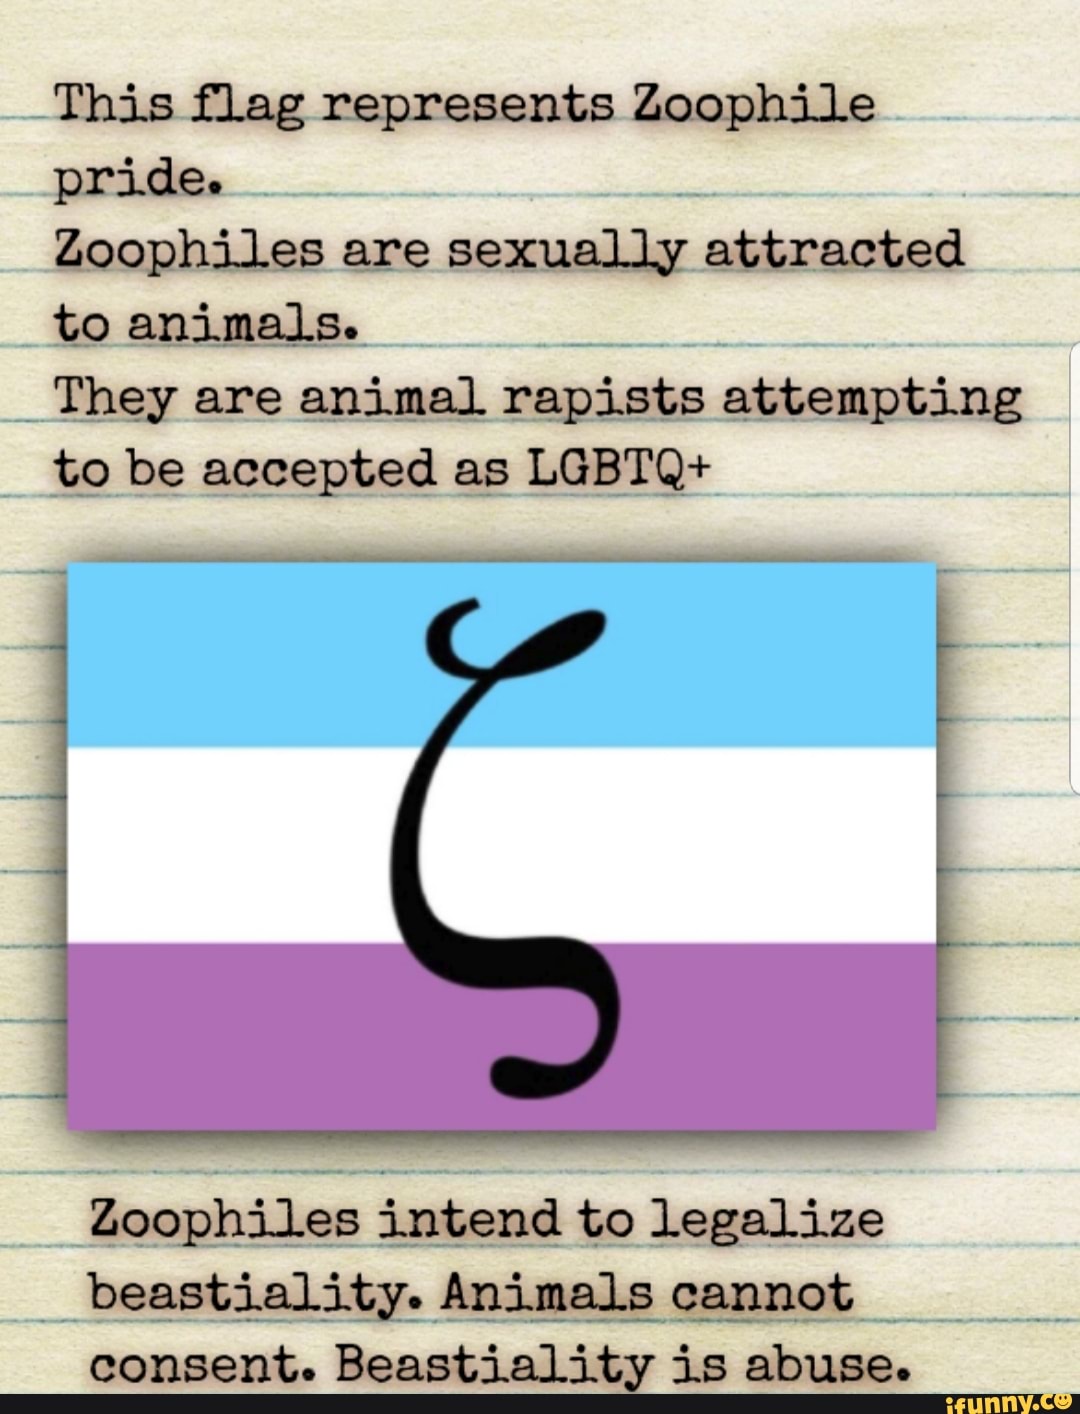 This flag represents Zoophile Zoophiles are sexually attracted They are  animal mandato ata pempting I to